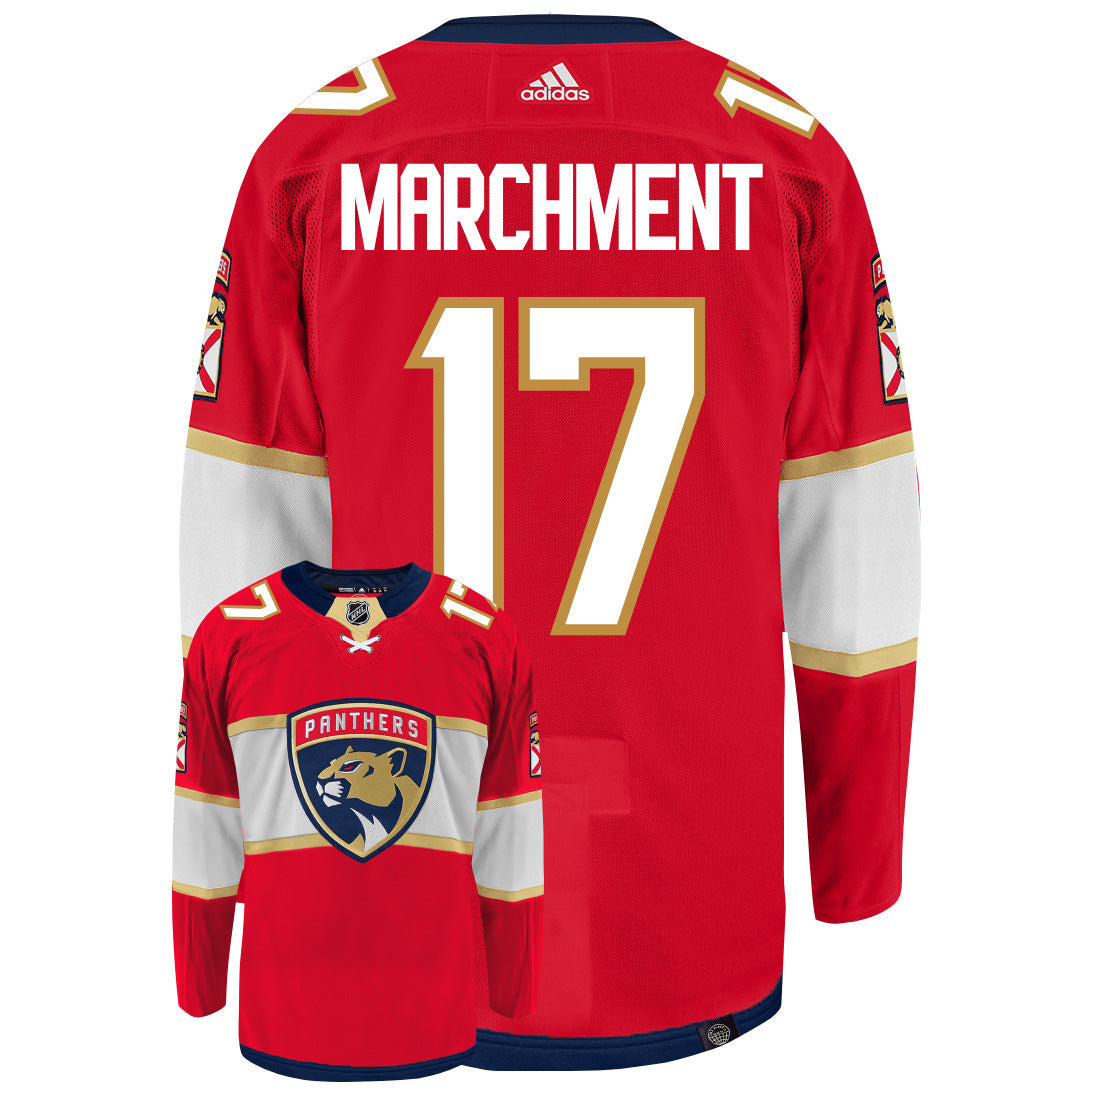 Mason Marchment Florida Panthers Adidas Primegreen Authentic NHL Hockey Jersey - Back/Front View